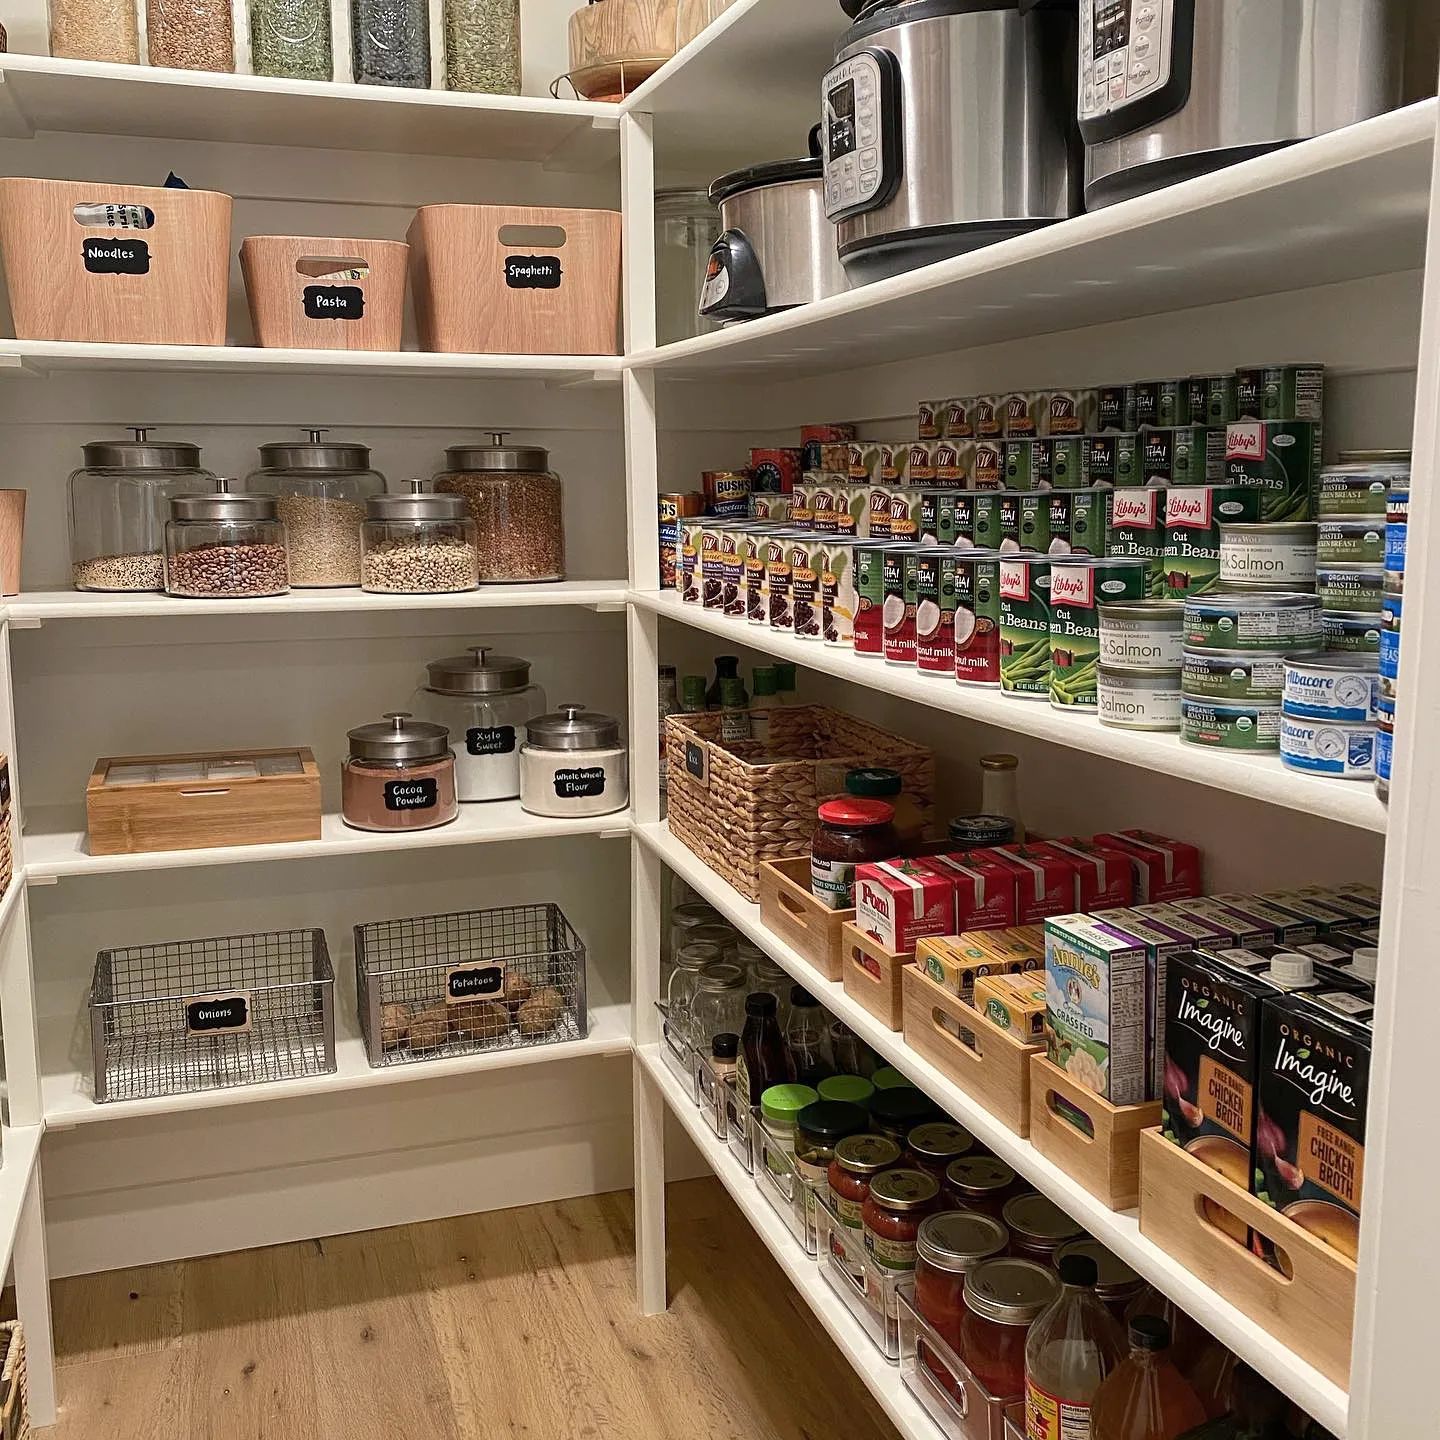 a pantry where items are neatly grouped together make finding items quicker and easier